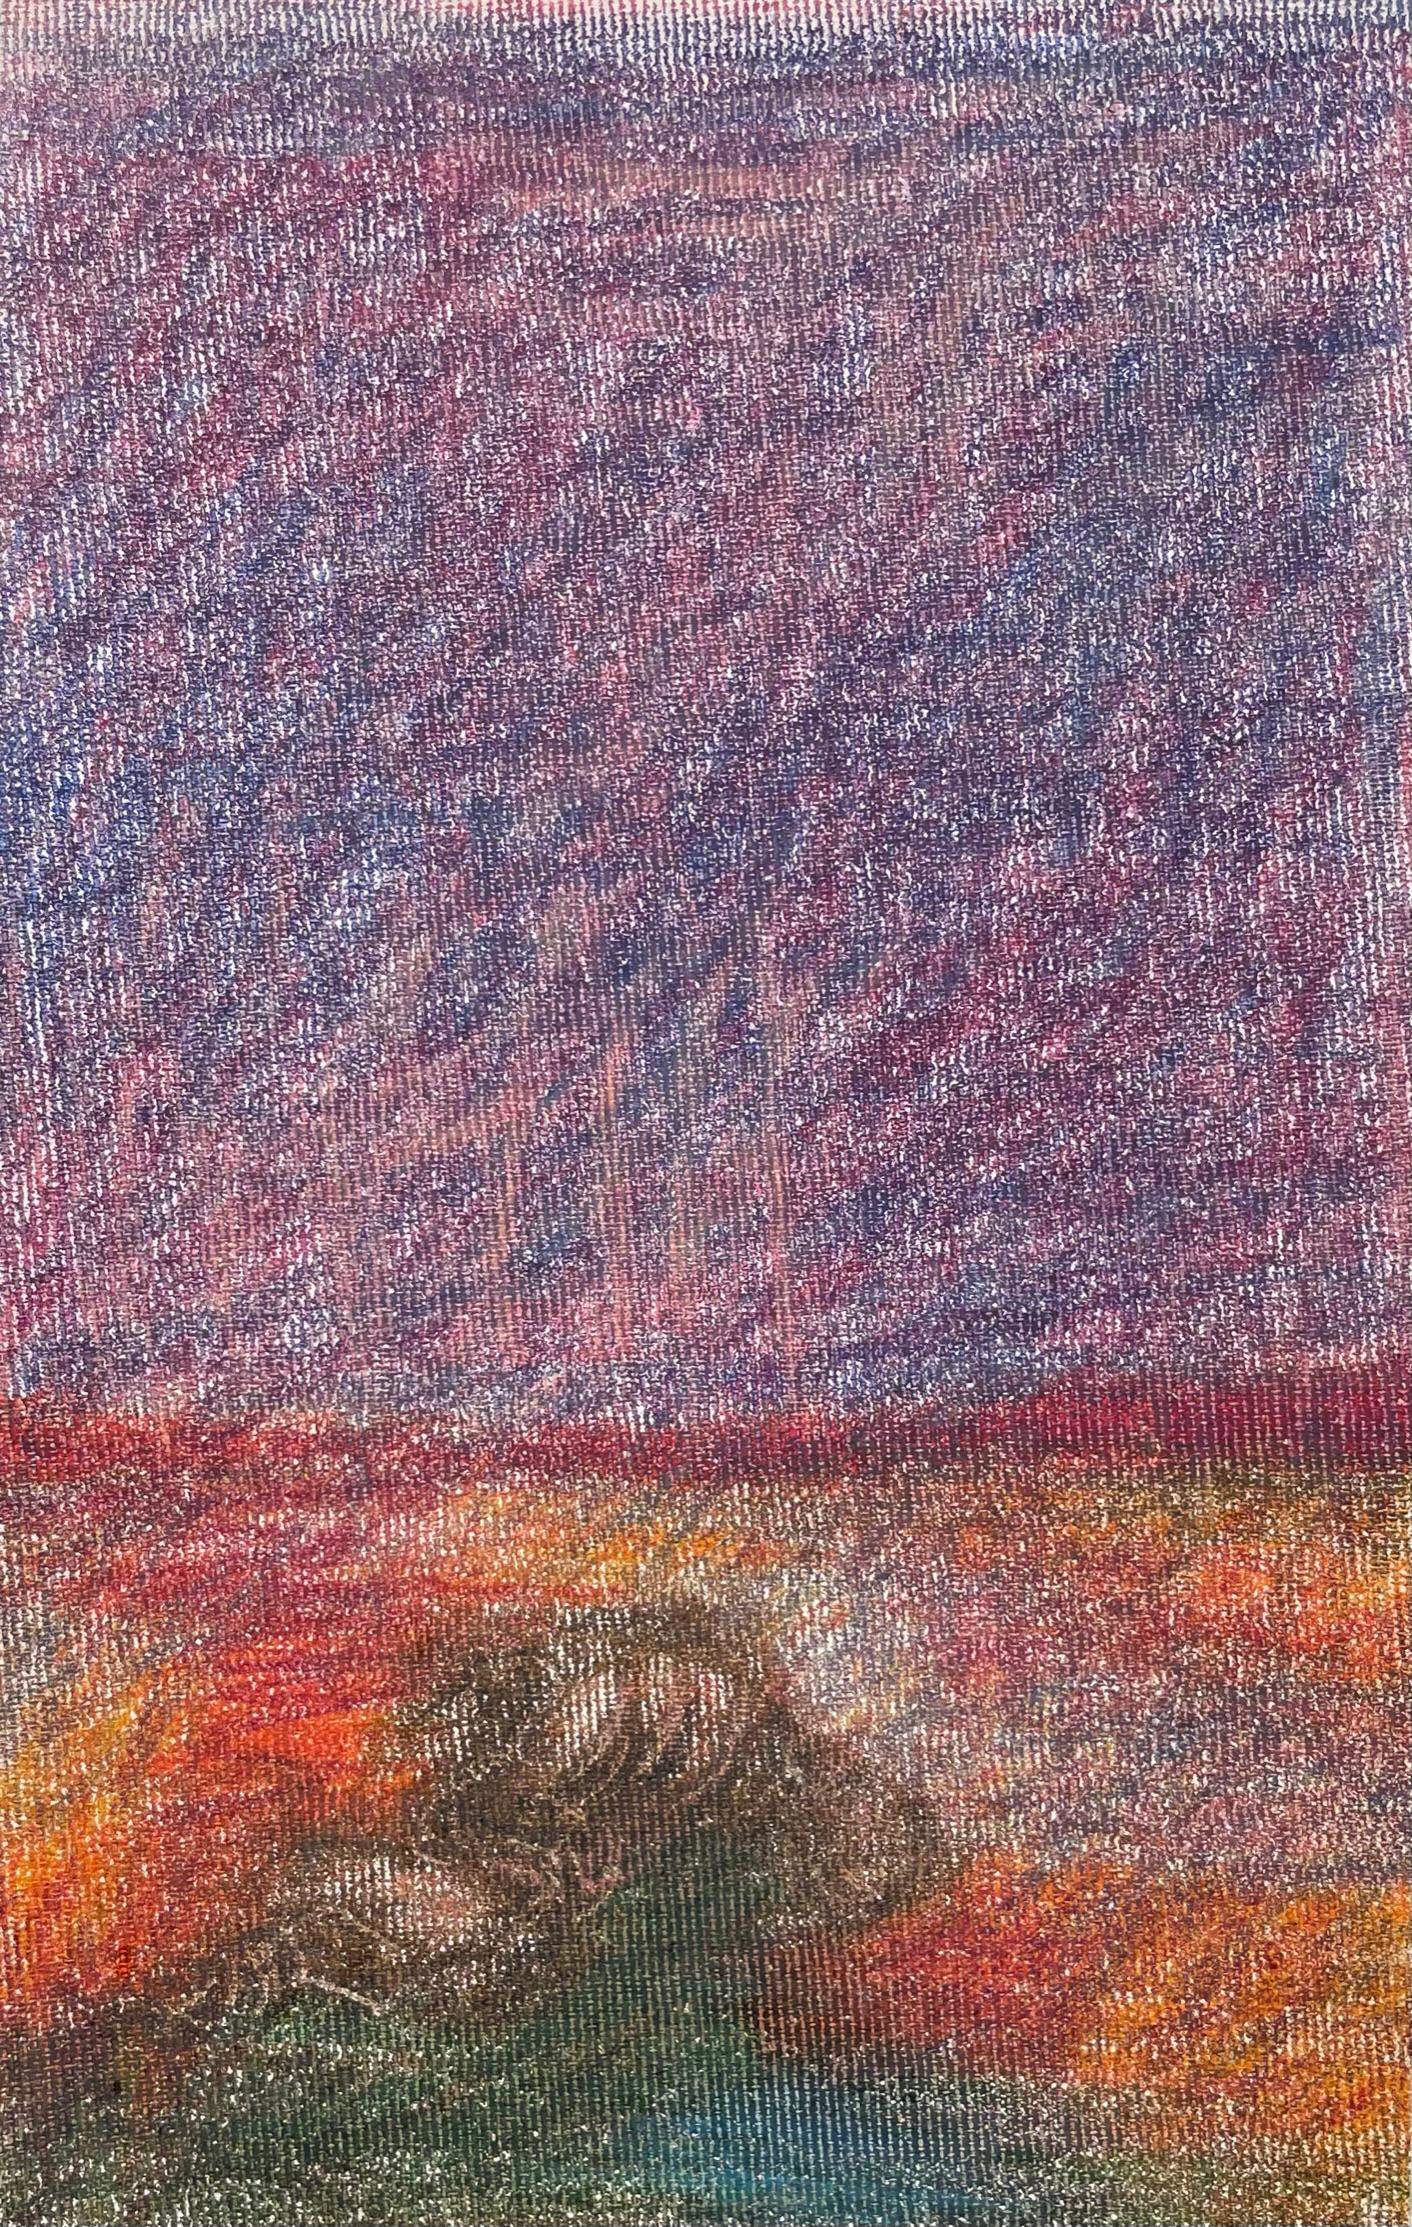 Body in the Field #1 - Red, Landscape, Coloured pencil, Drawing